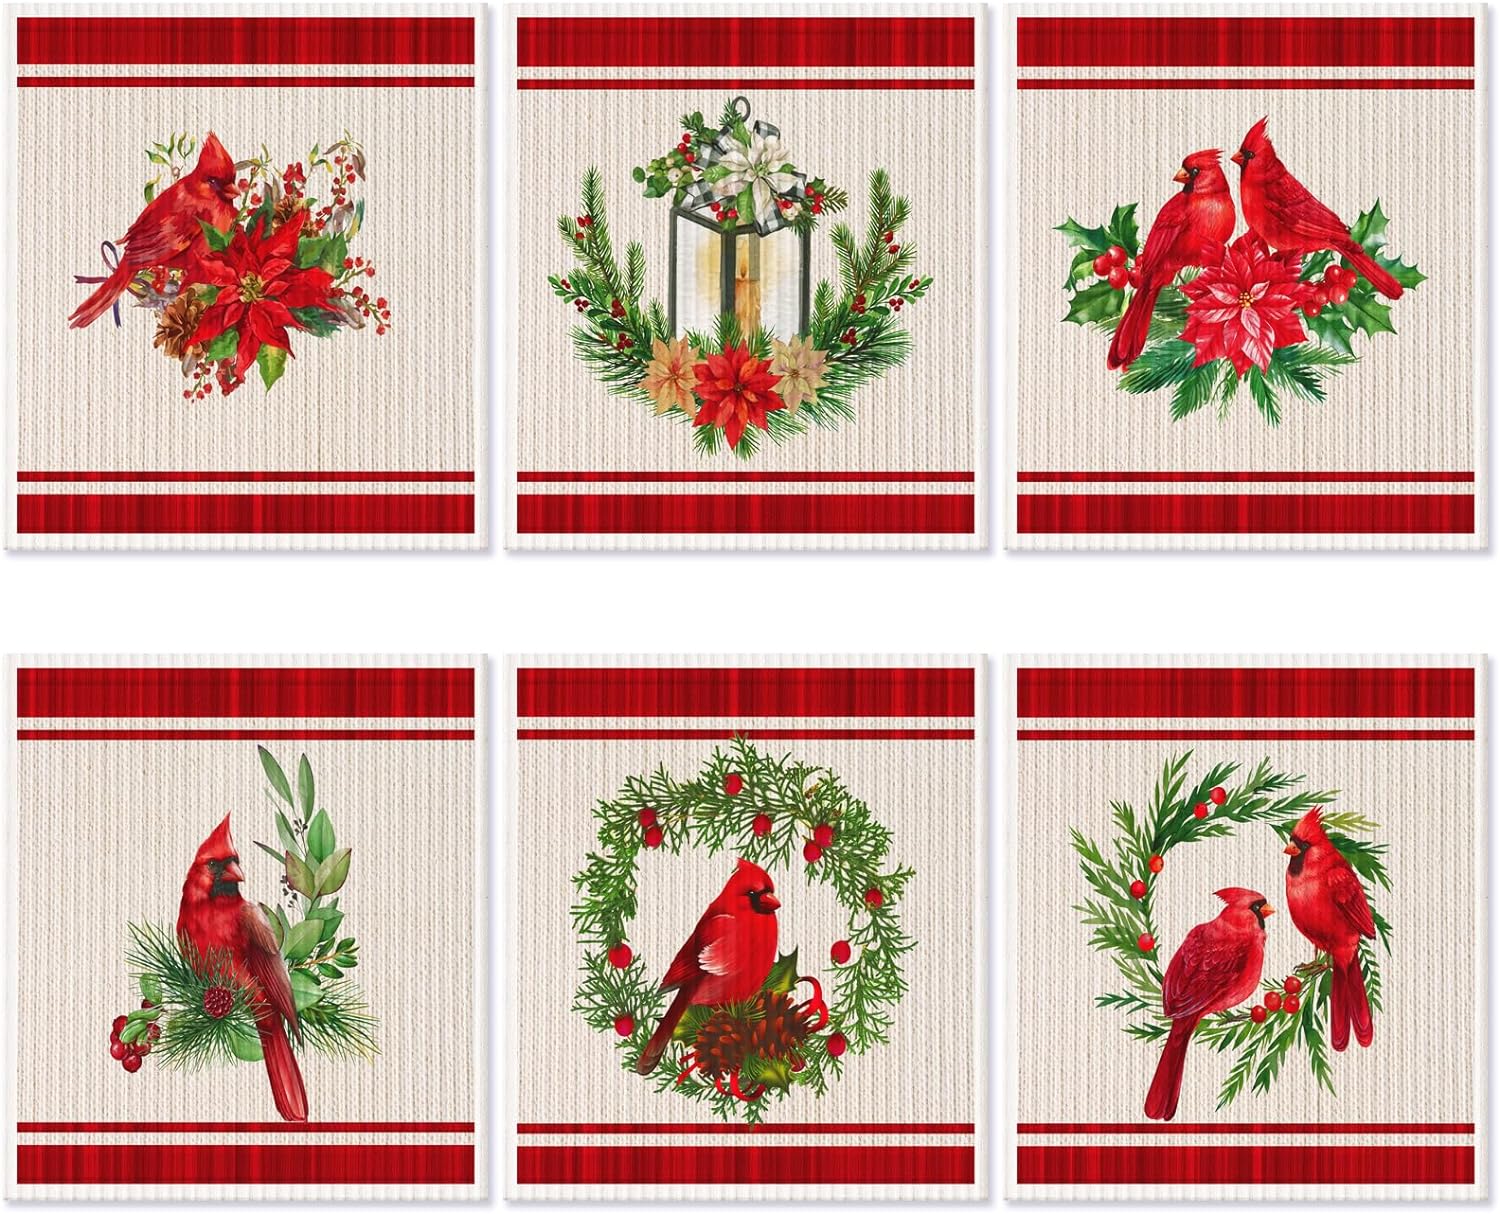 allport editions bird lover's christmas-tea towel the top 14 funny 12 days of christmas gift ideas